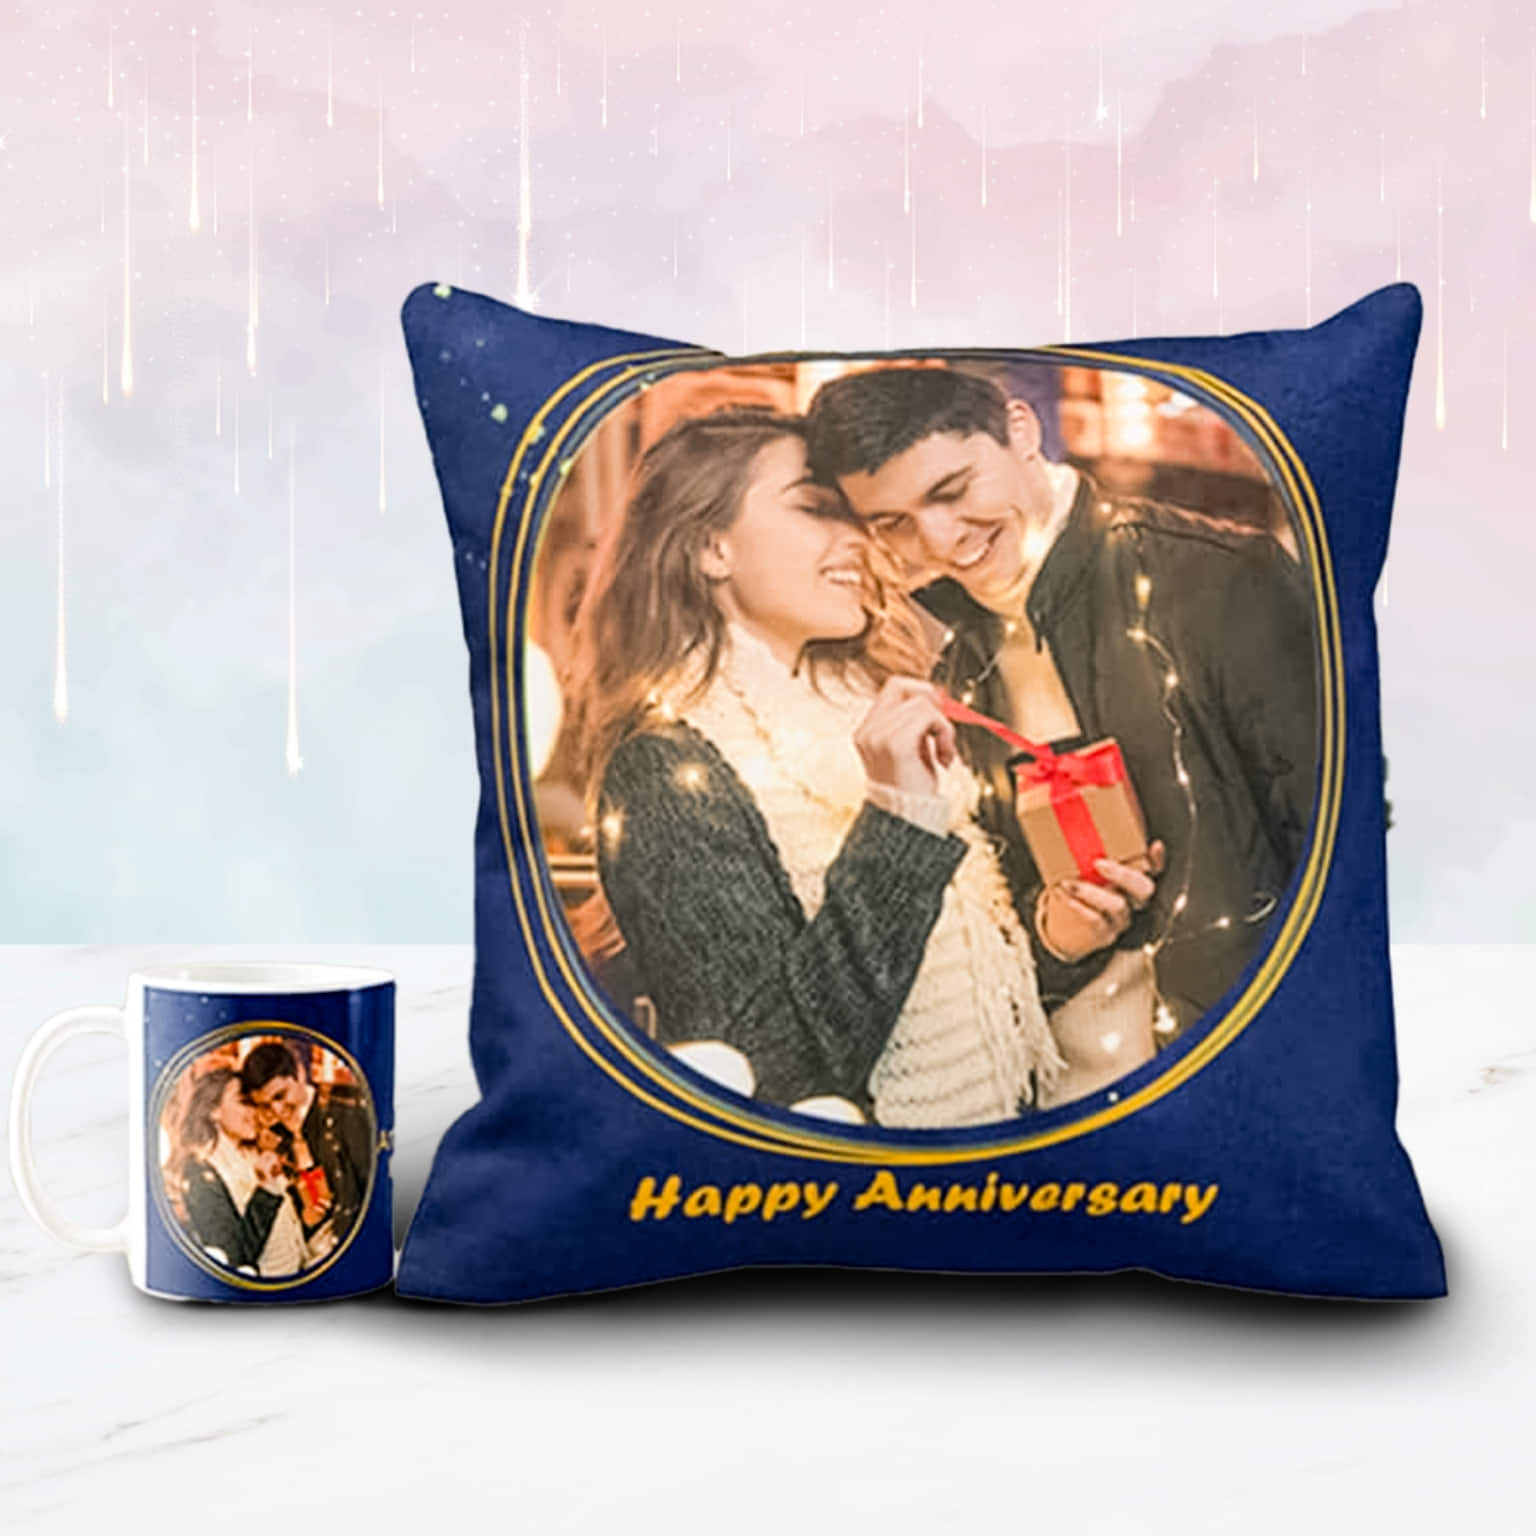 OUR WEDDING DAY – Personalised Anniversary Gift Idea